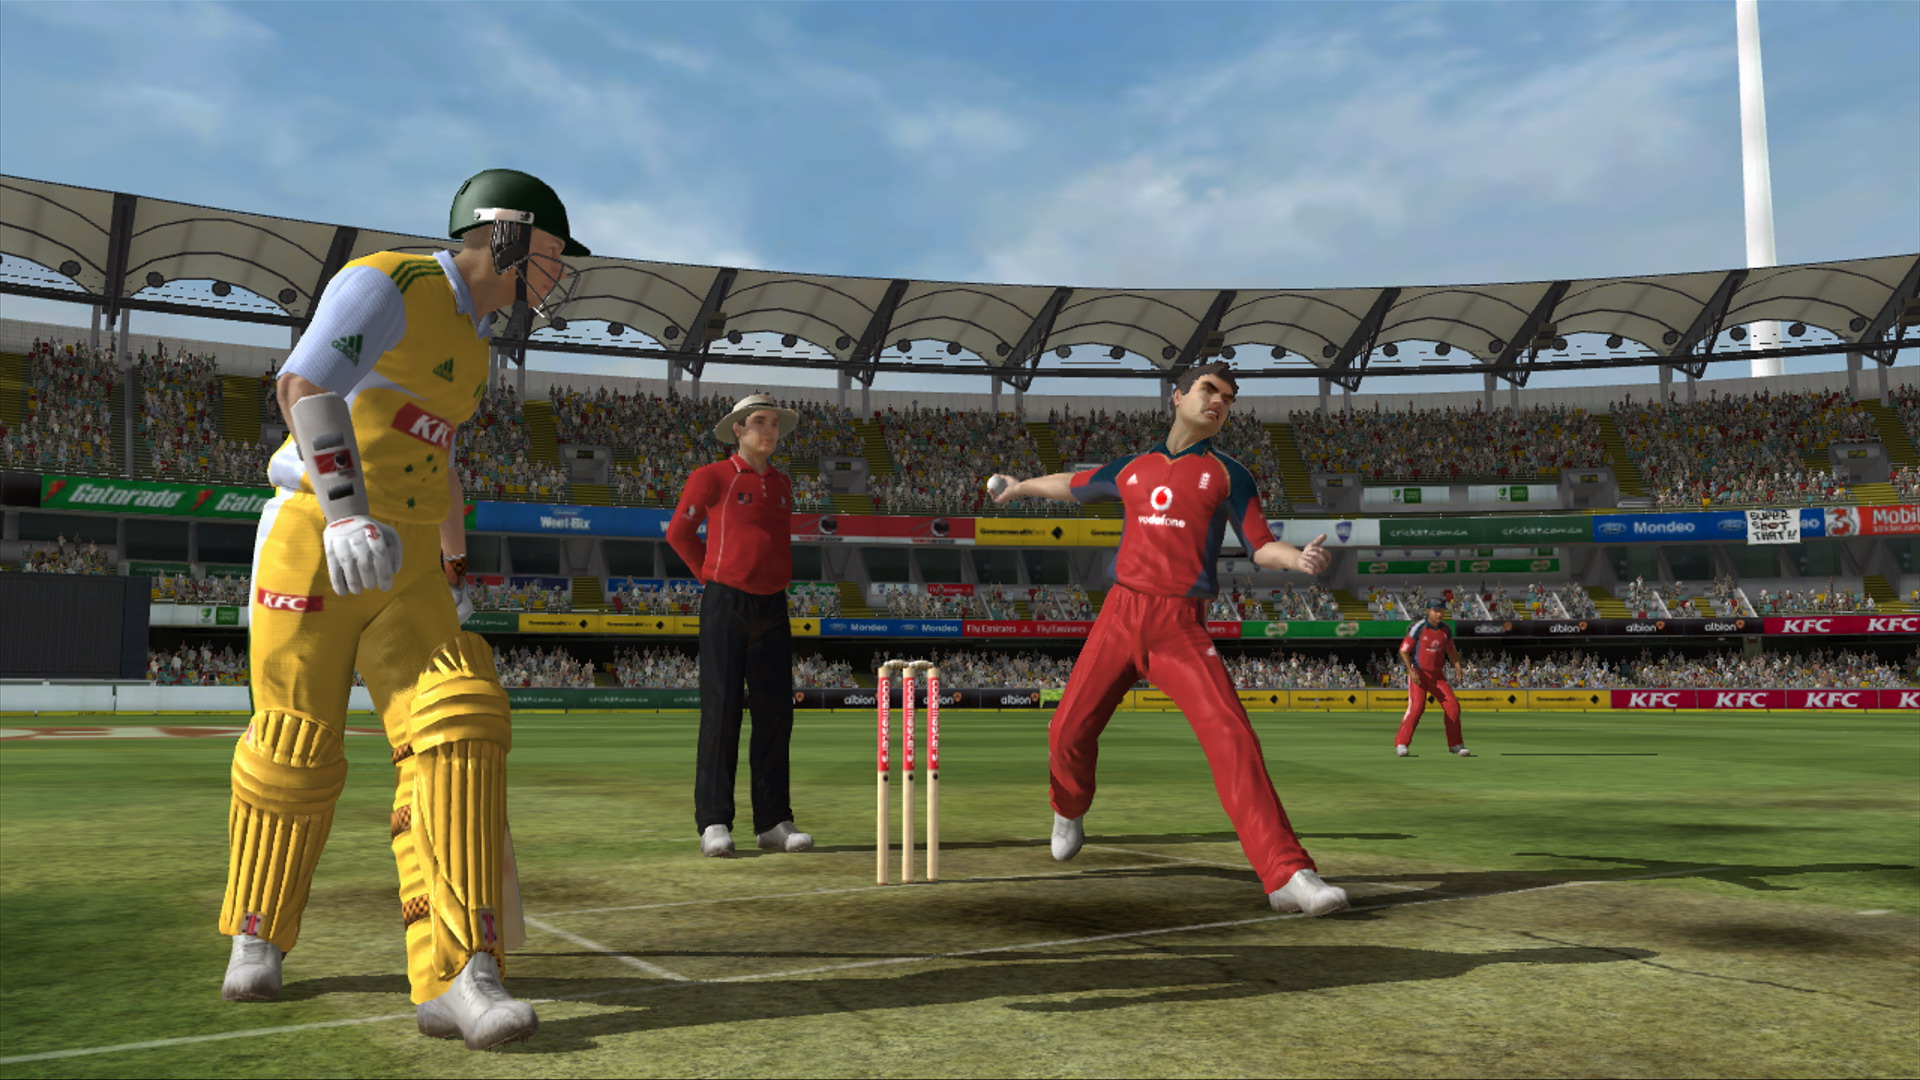 Ashes cricket 2009 GAME Download | Highly compressed games free download